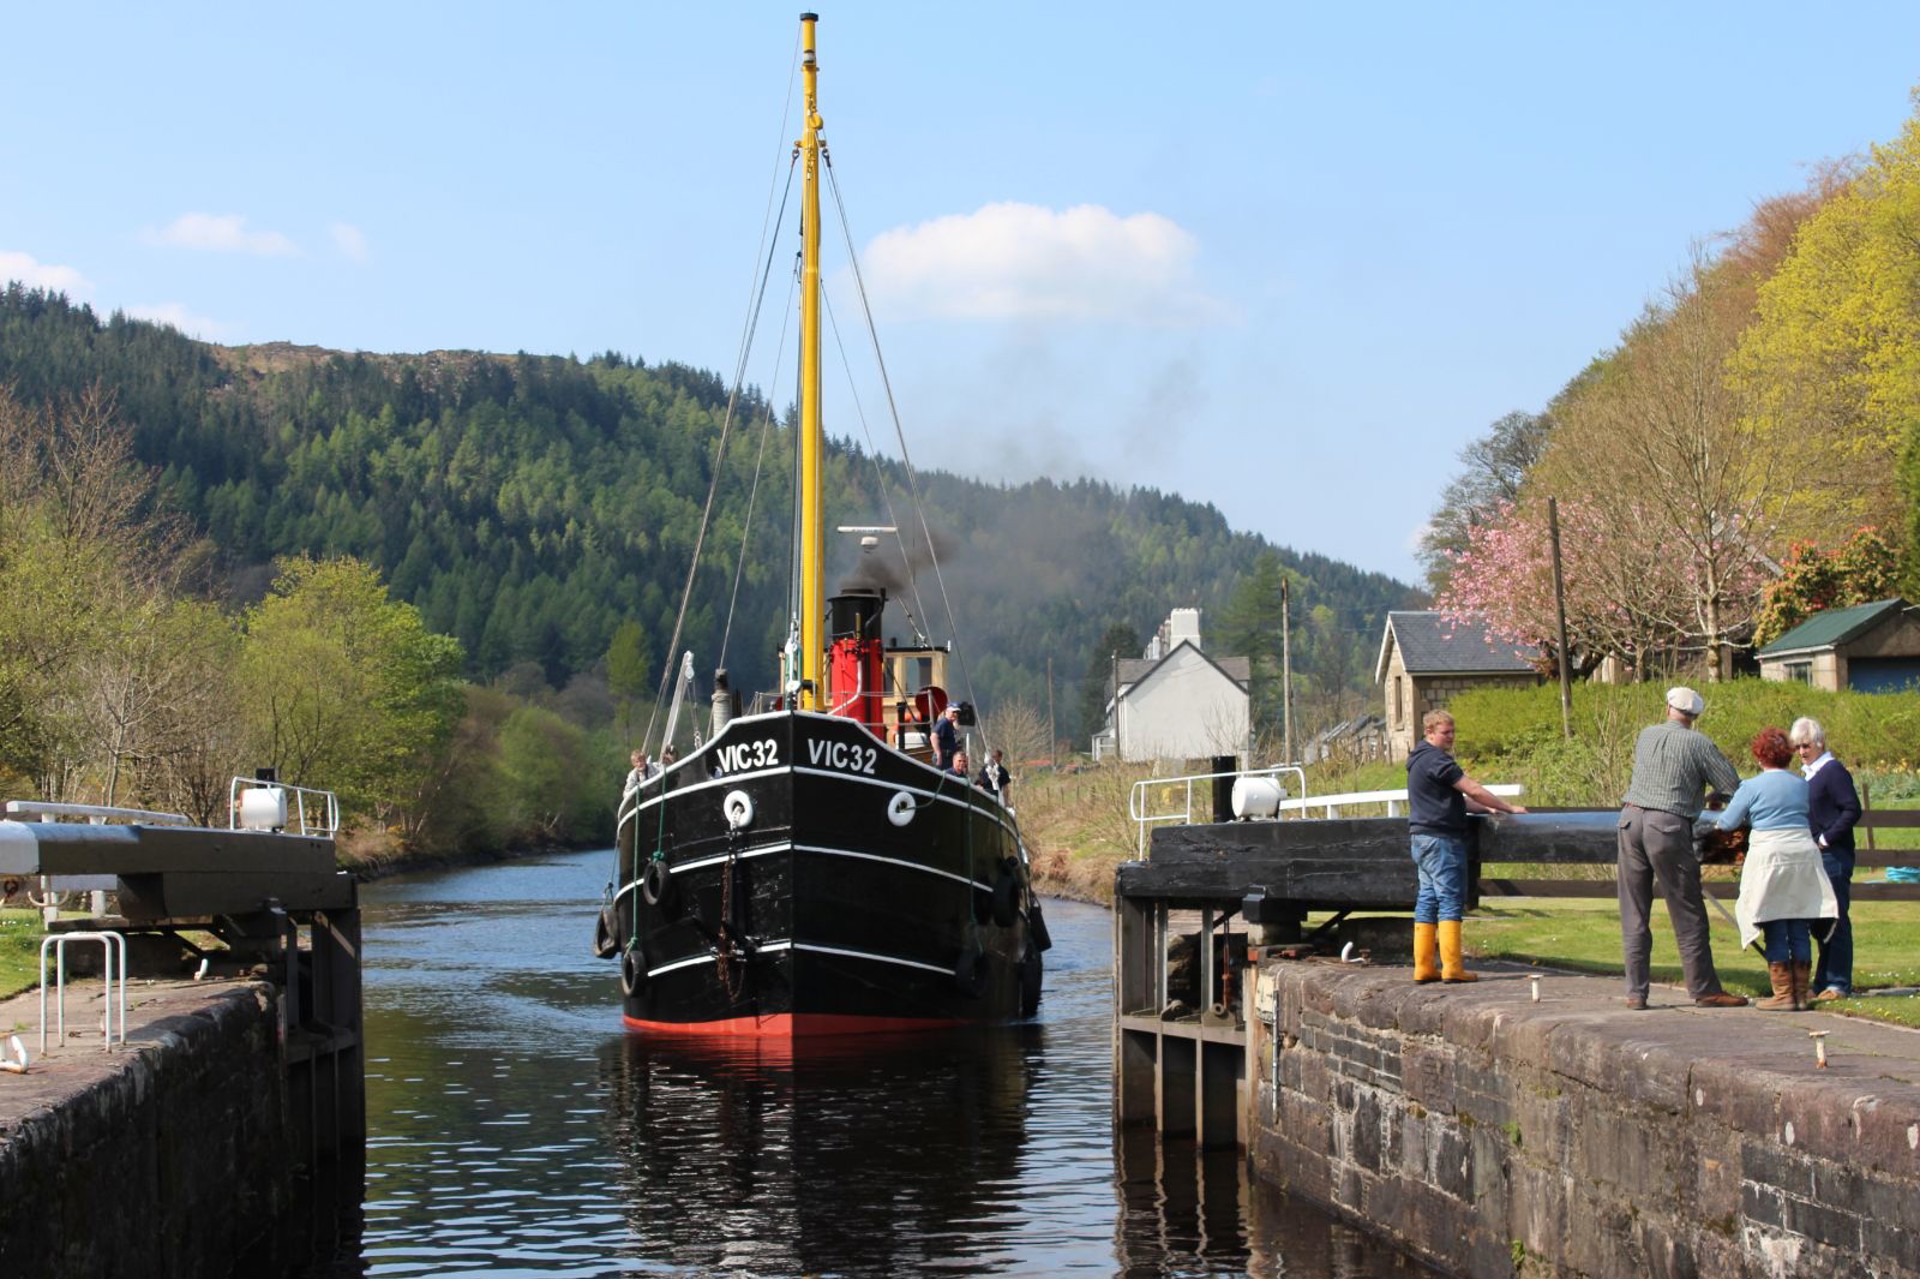 Background image - Steamer Boat Crinan Canal